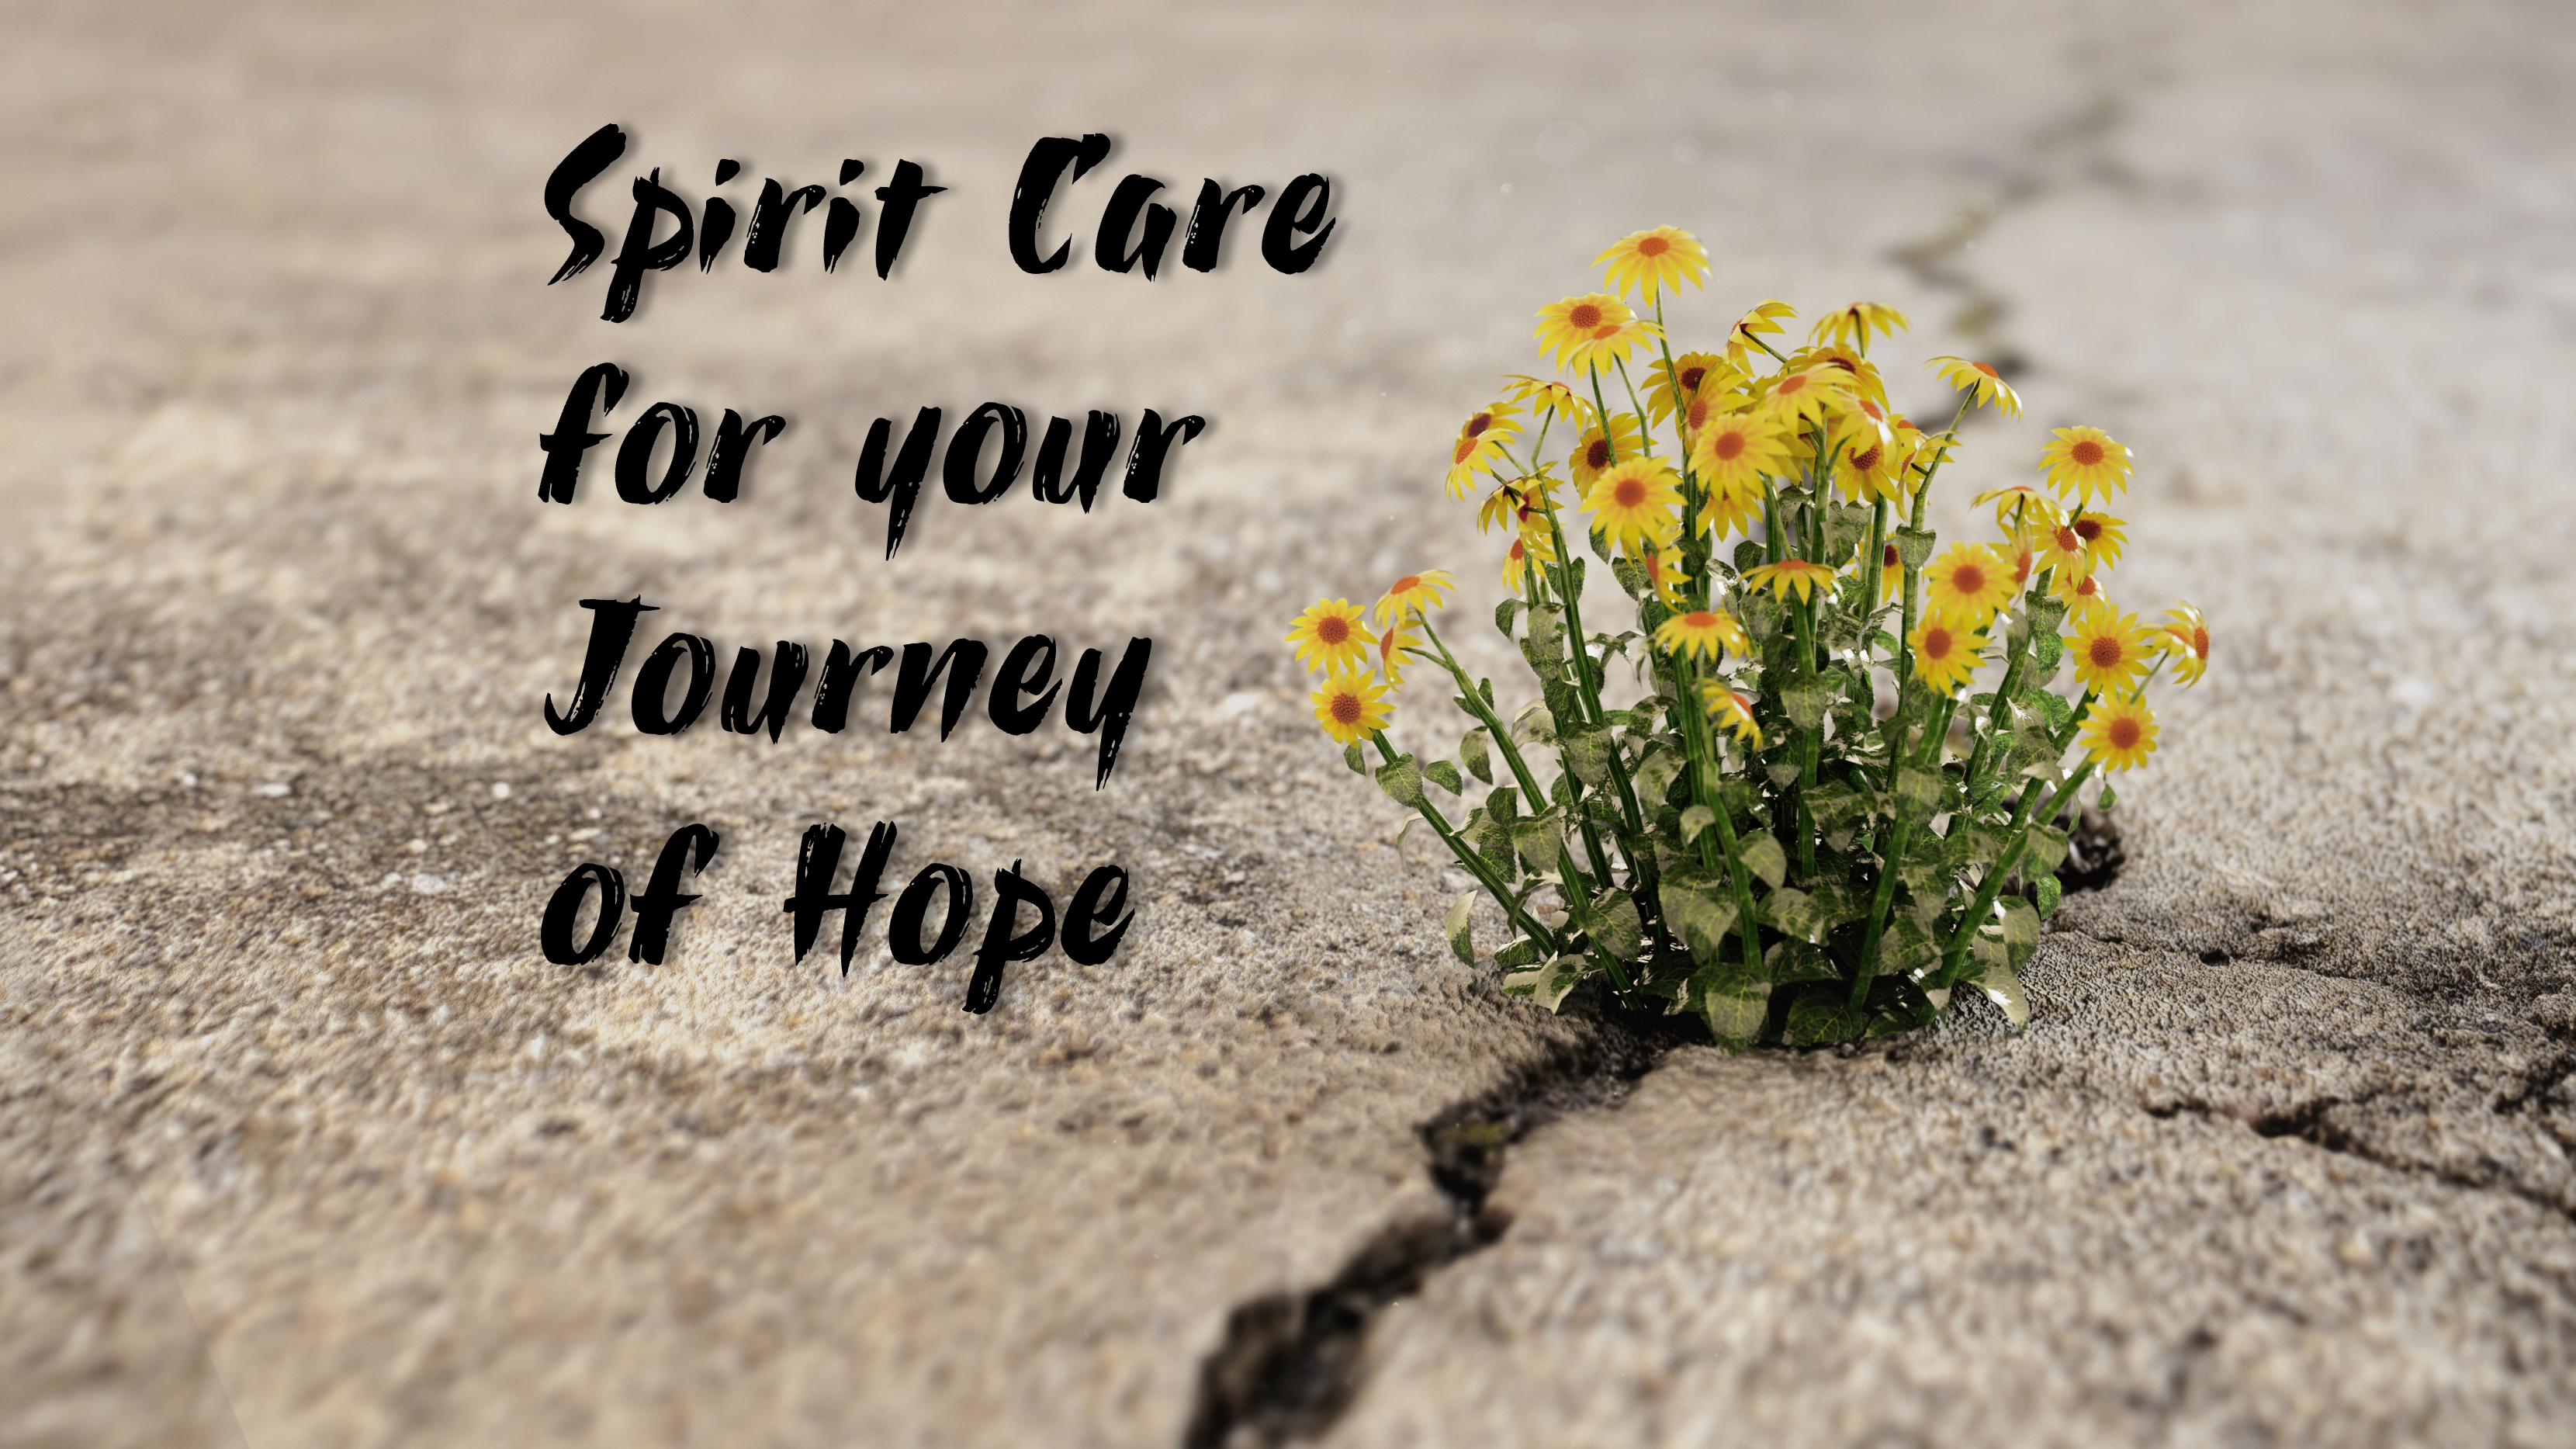 Spirit Care on the Way of Hope